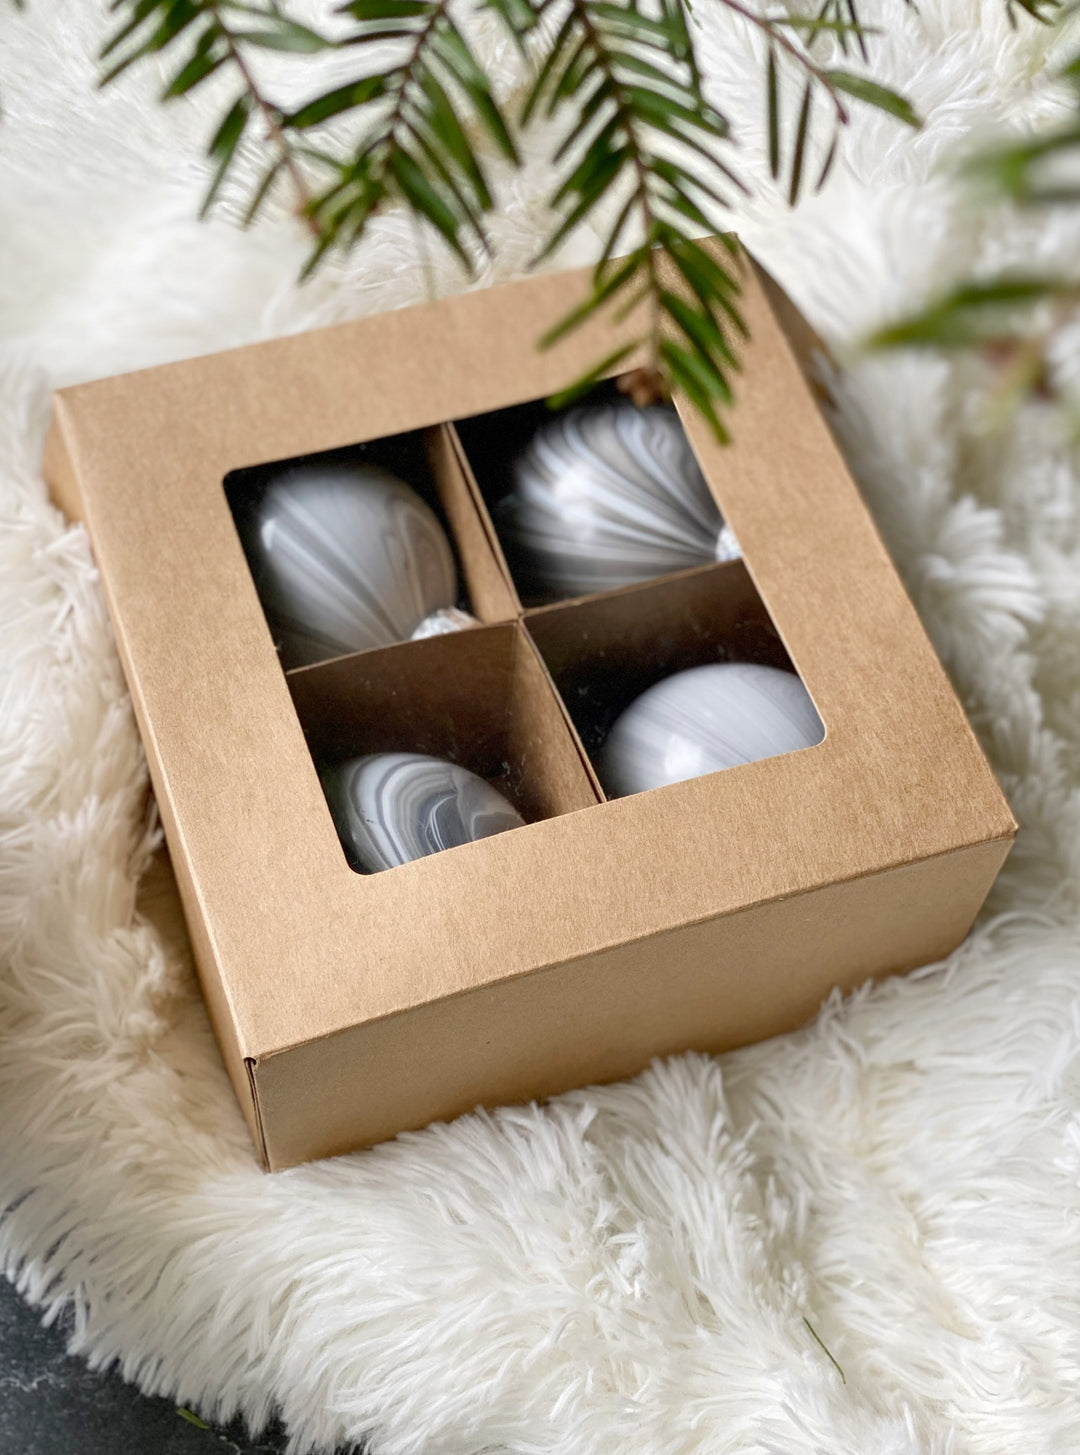 Hand-Dipped Ornaments, Hygge Collection